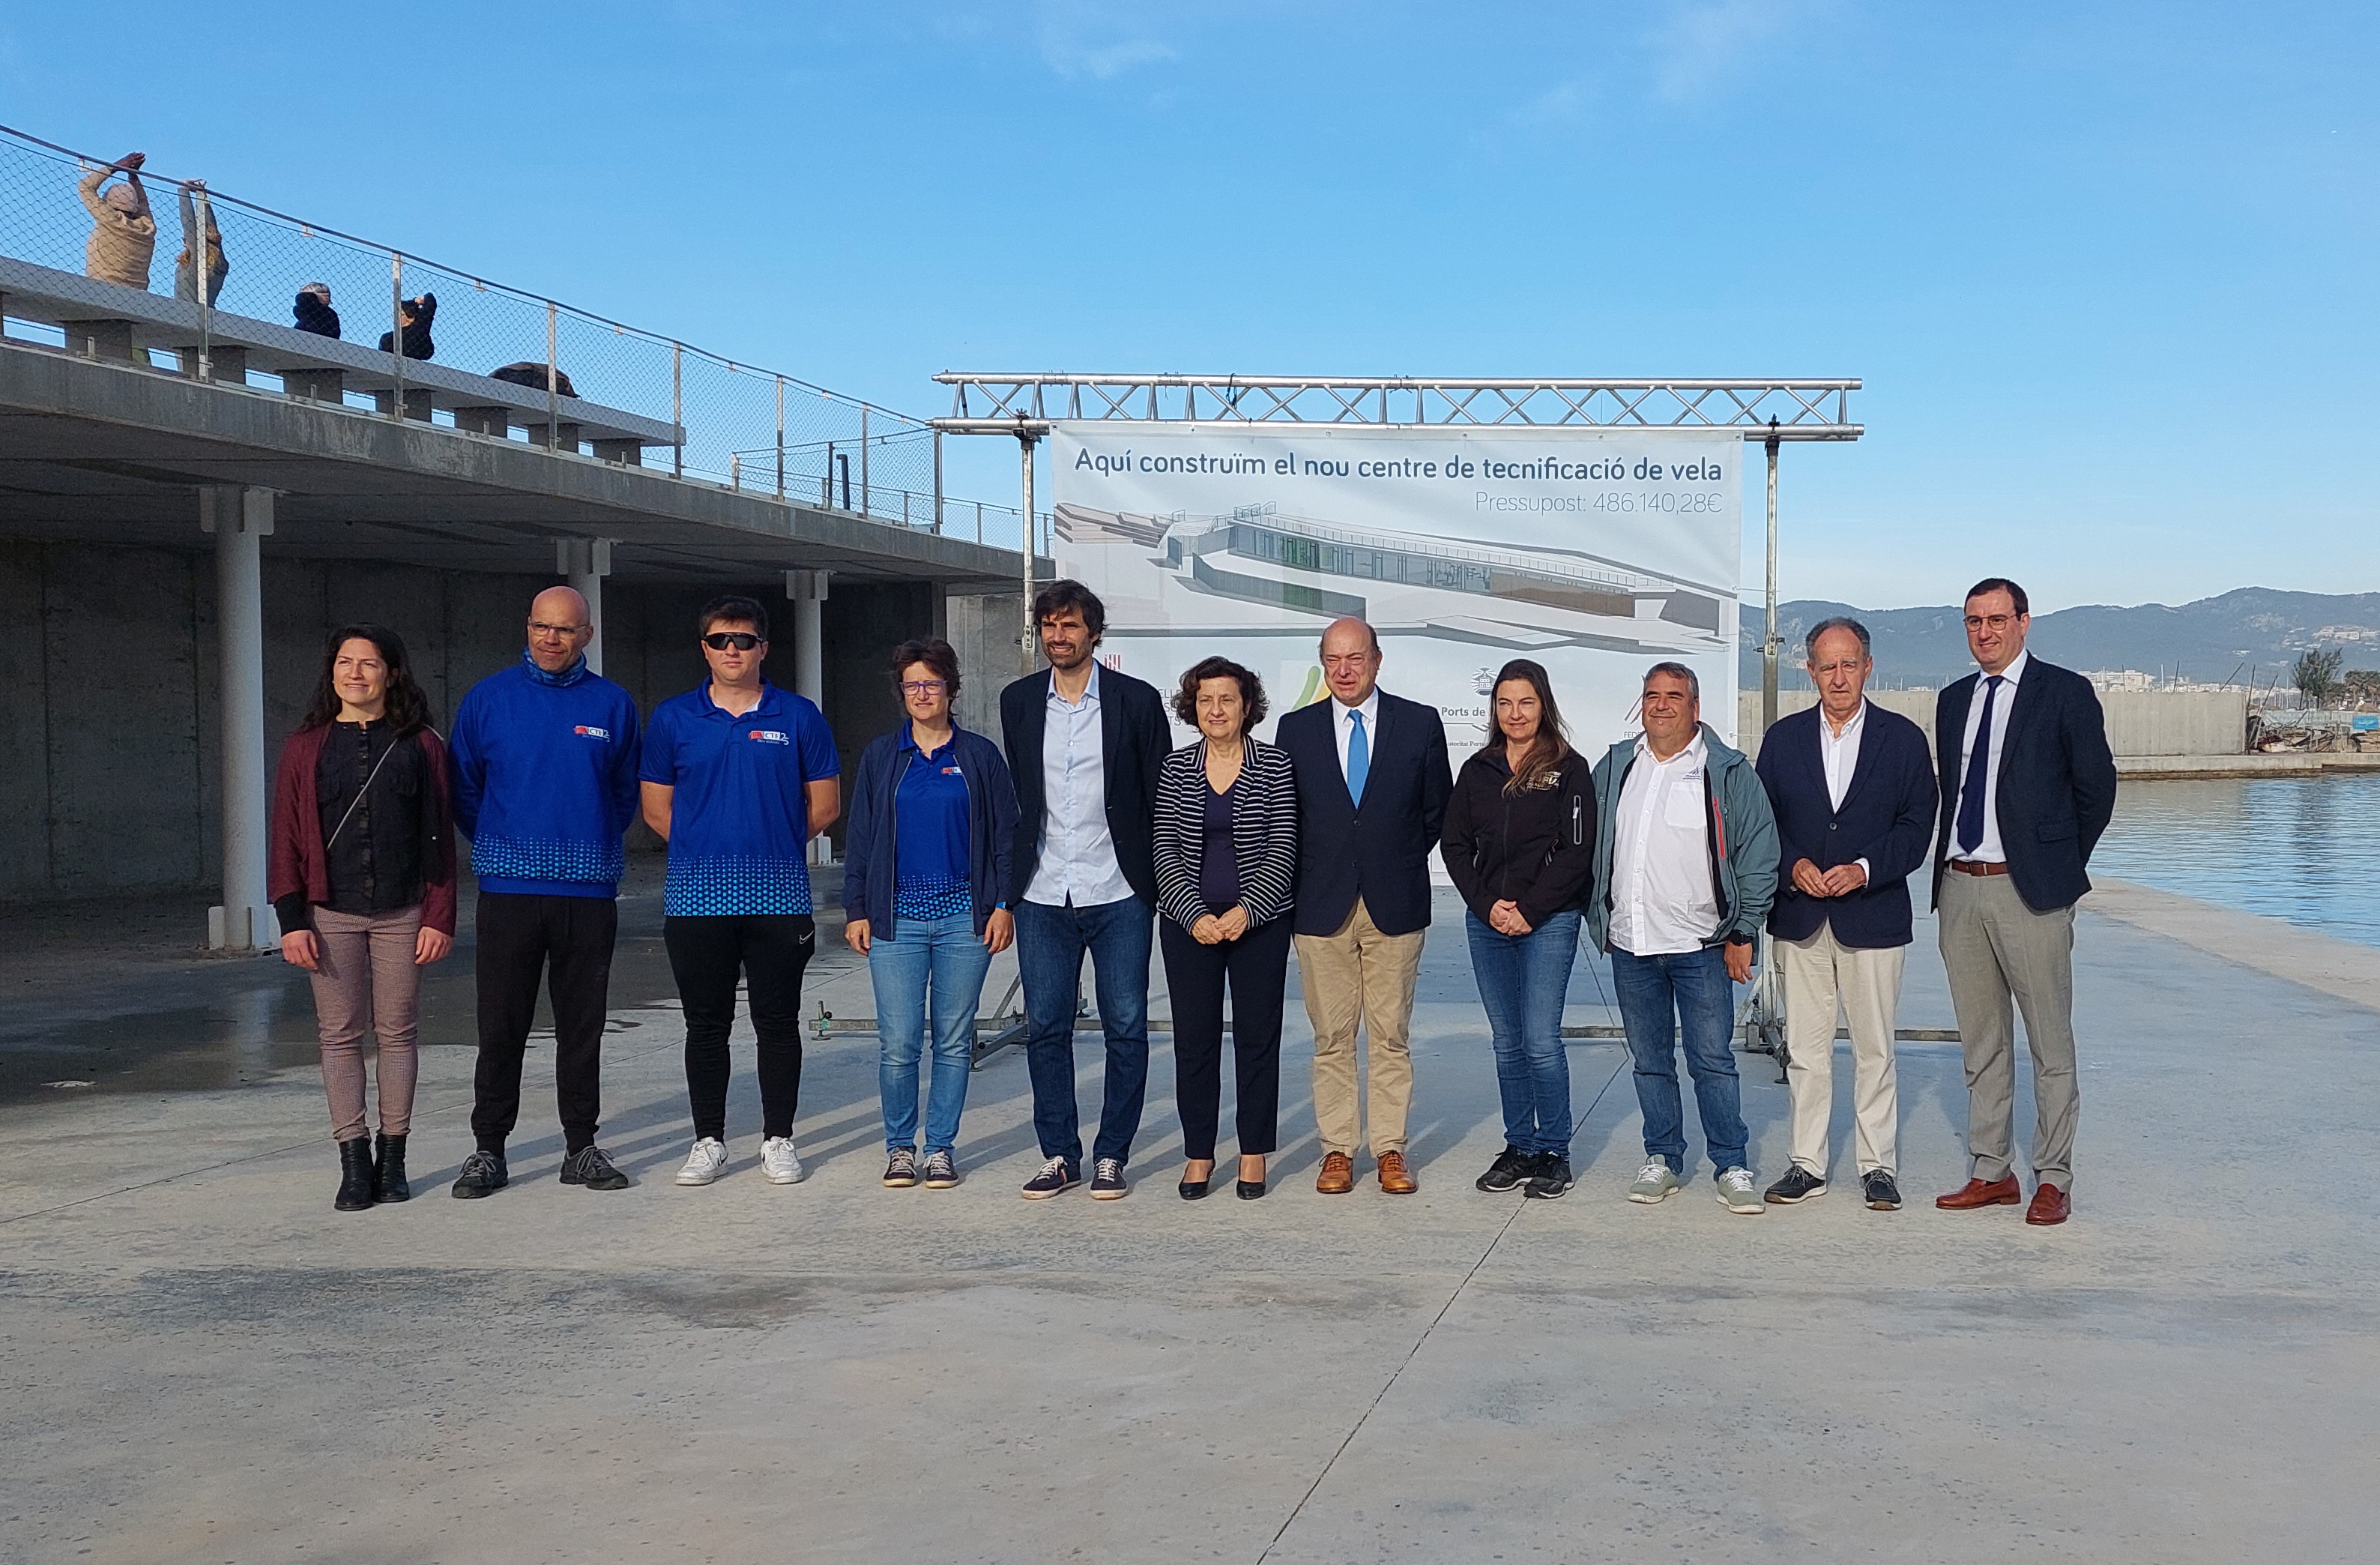 Sailing and windsurfing in the Balearic Islands will have their own space for general and technical training